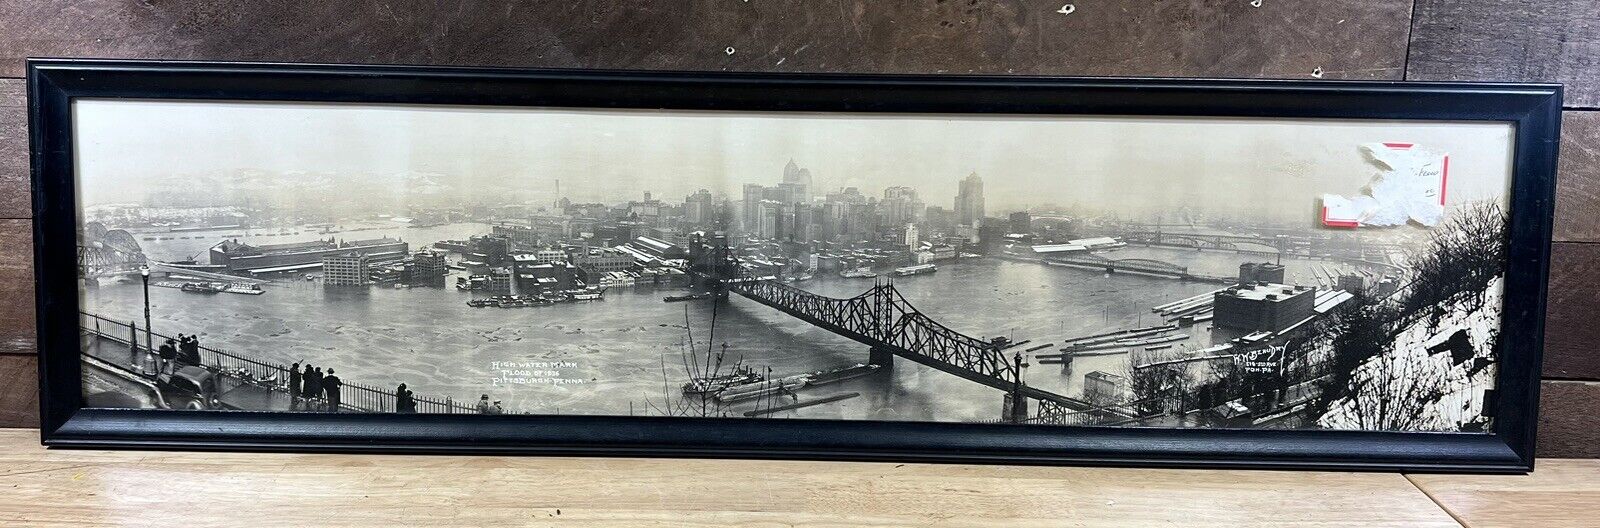 Antique Yard Long Photo Of The 1936 High Water Mark Flood Pittsburgh, Penna. 